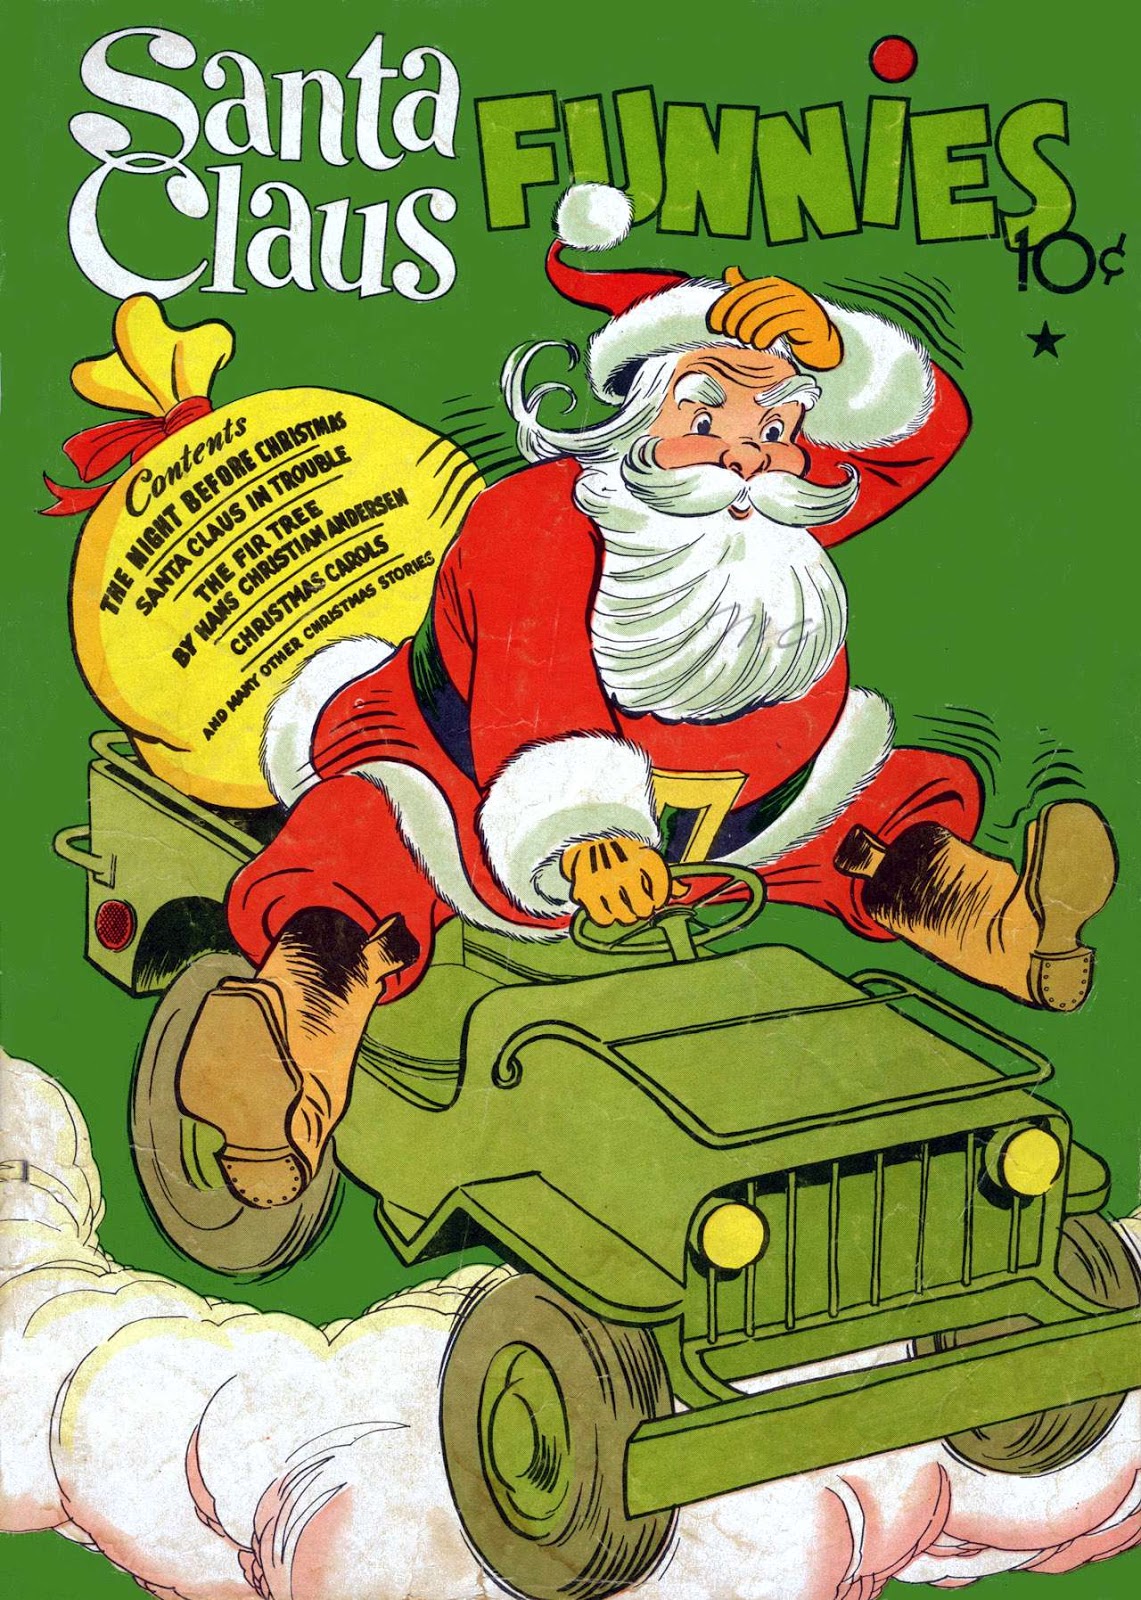 Yet Another Comics Blog Christmas Covers December 13 